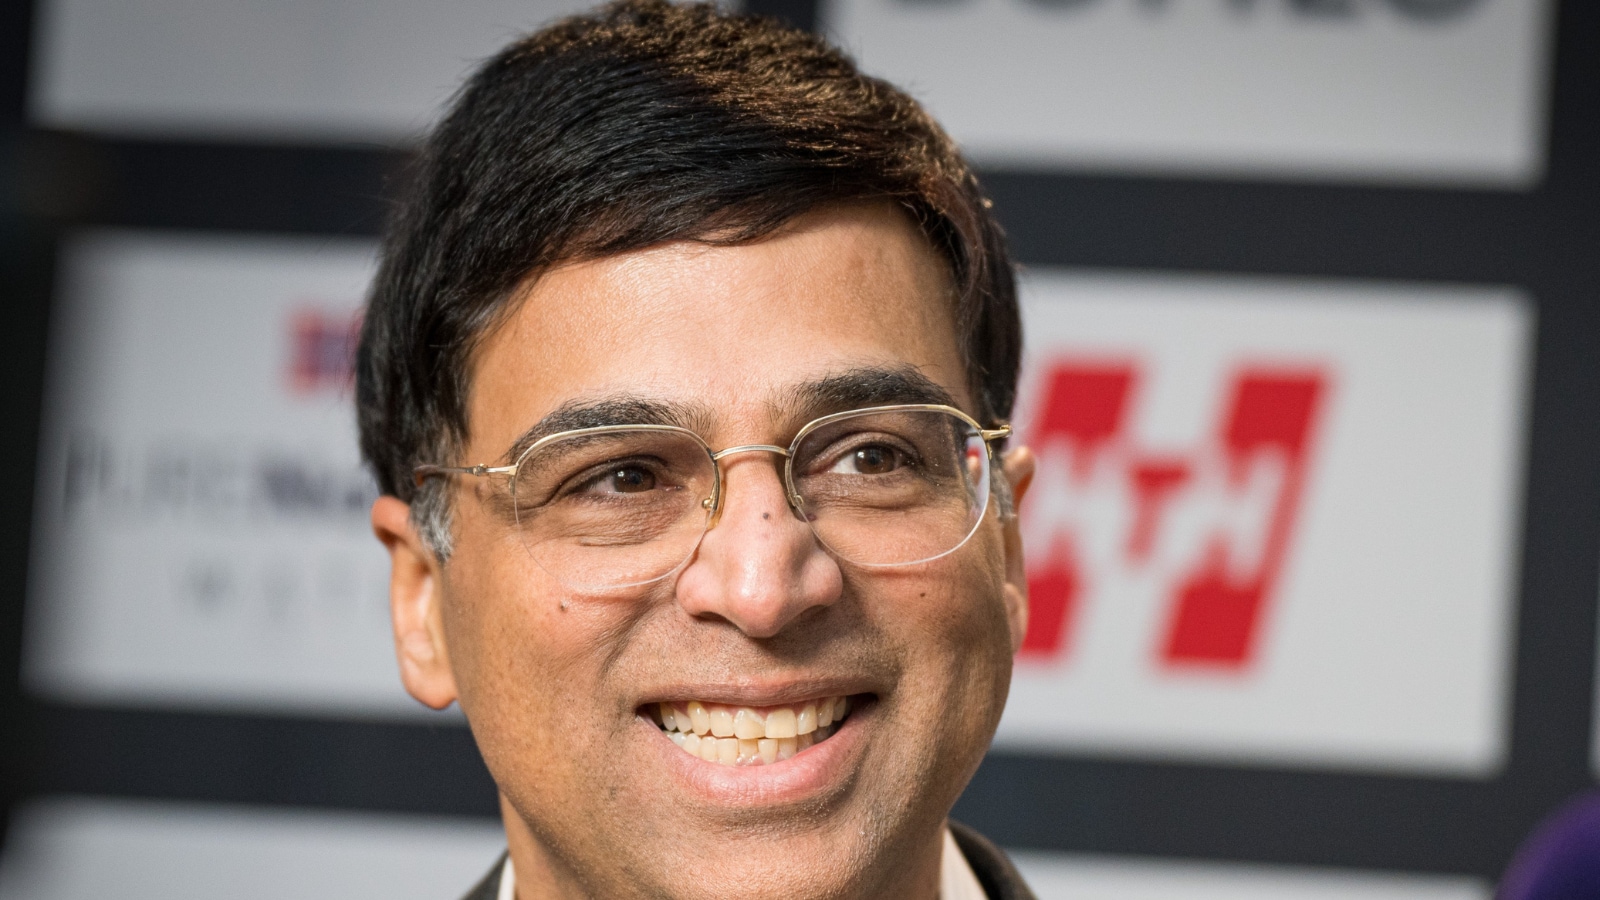 Game of Thrones: Viswanathan Anand takes on World No. 1 Magnus